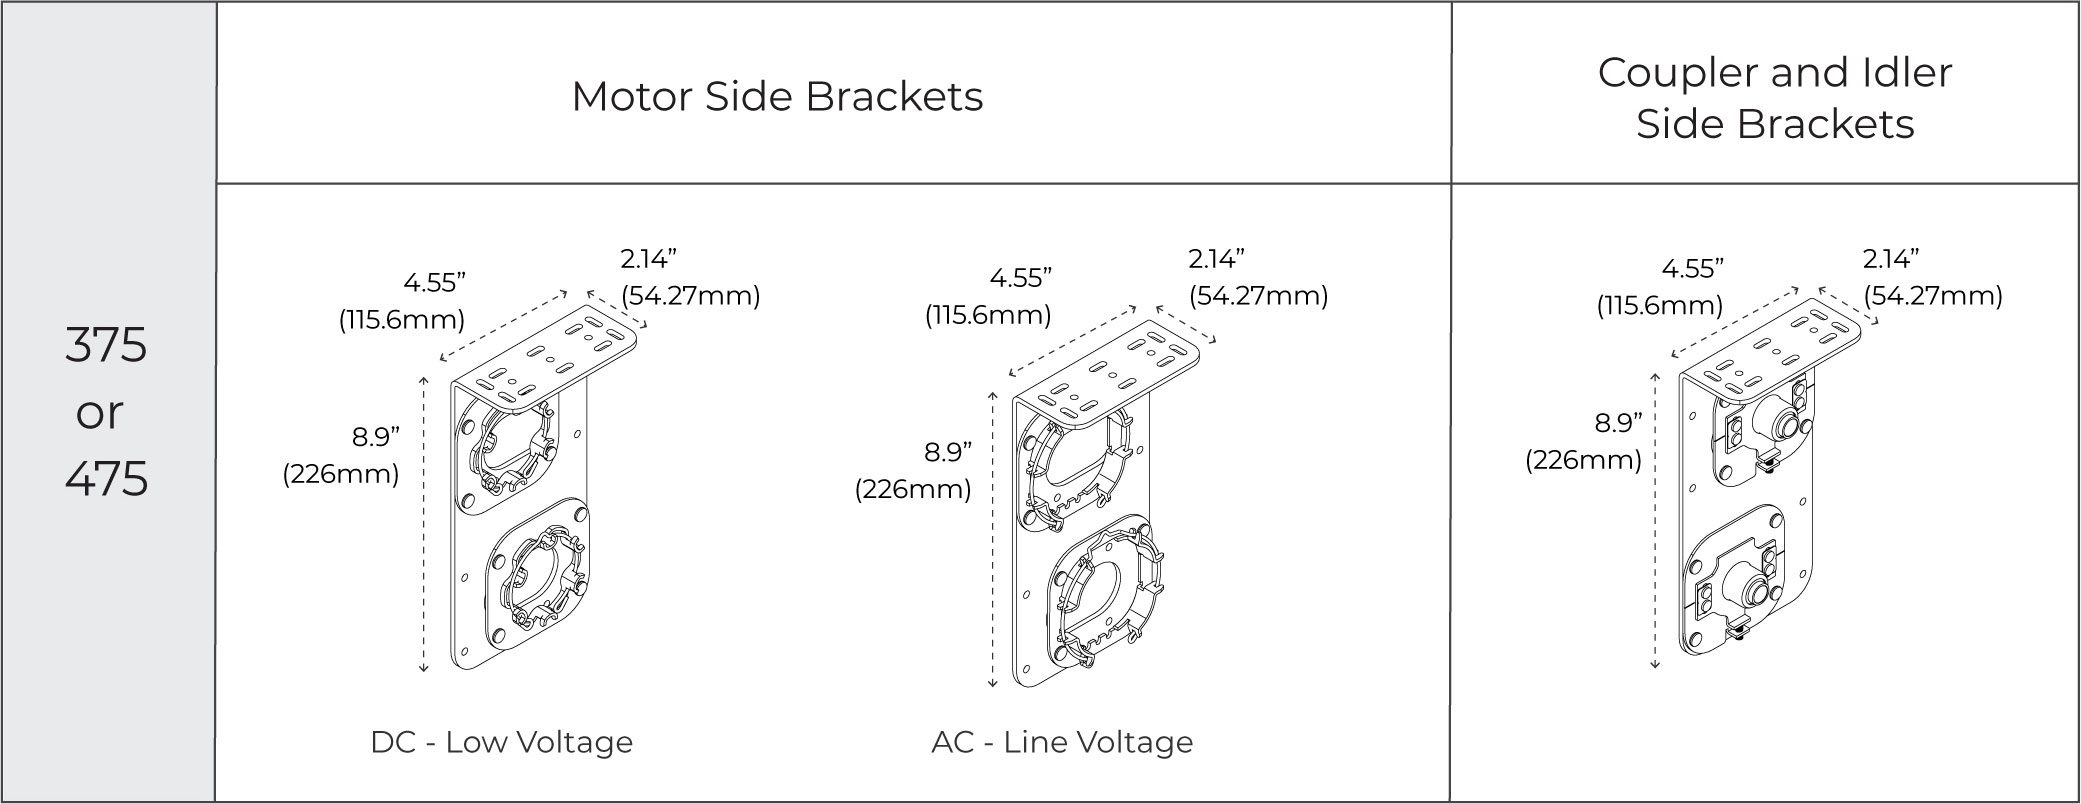 Pocket Coupled Duo Brackets spec drawing